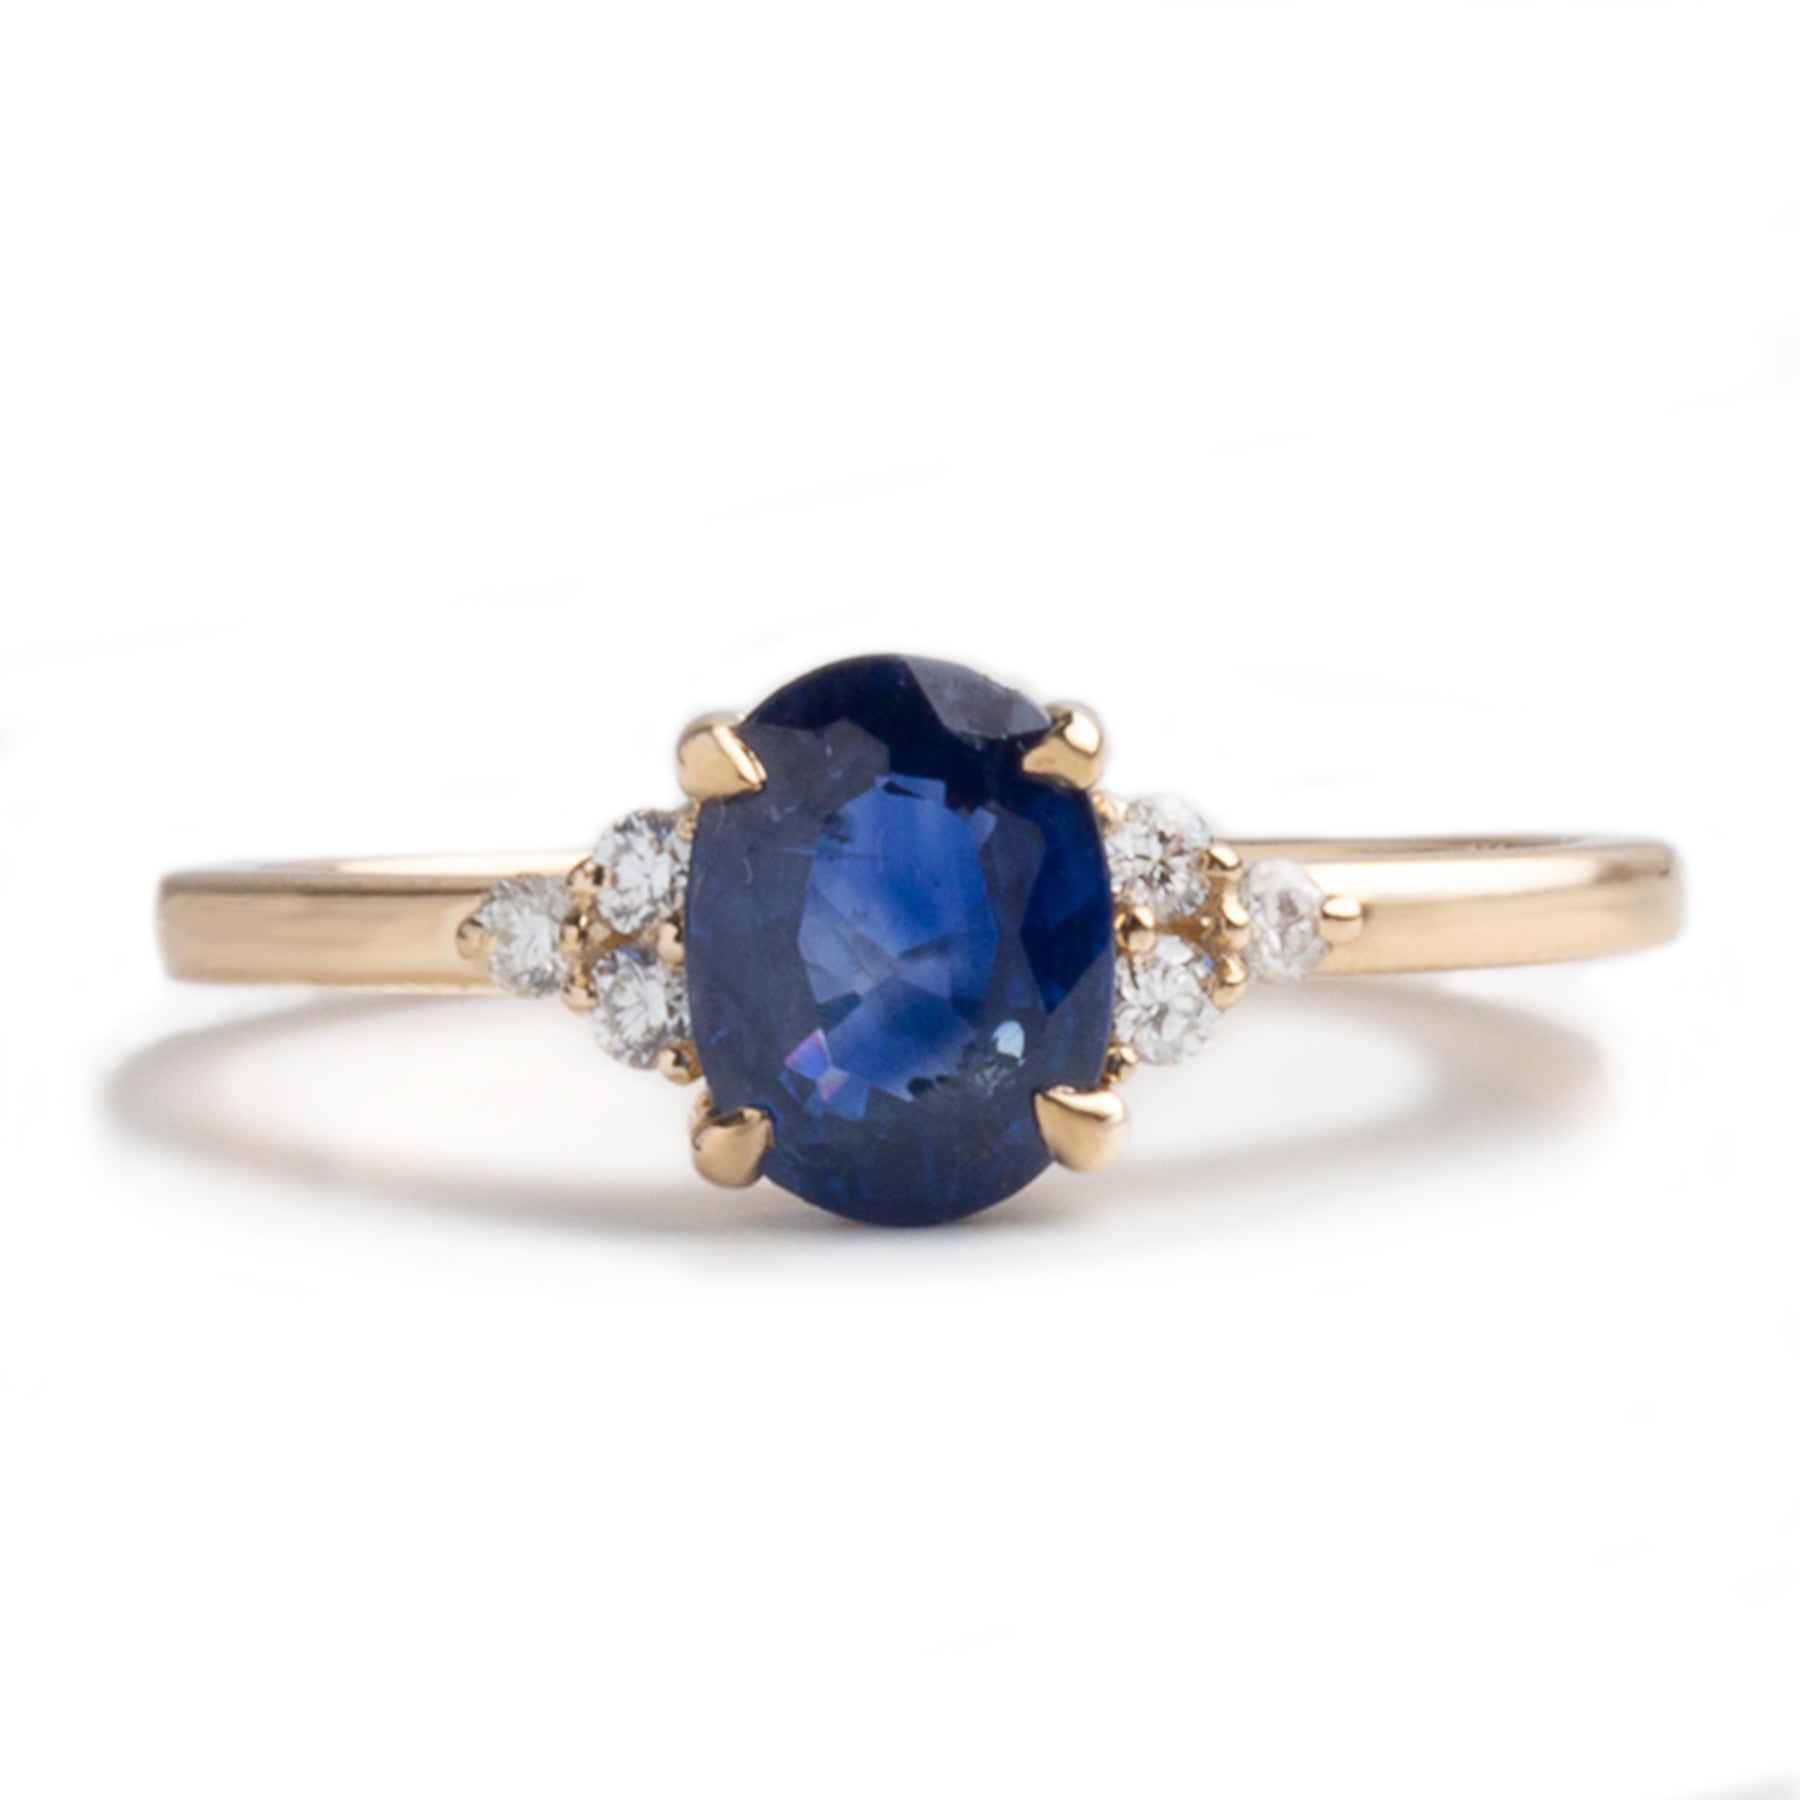 14k yellow gold 1.20ct oval cut blue sapphire diamond trio side stones engagement ring